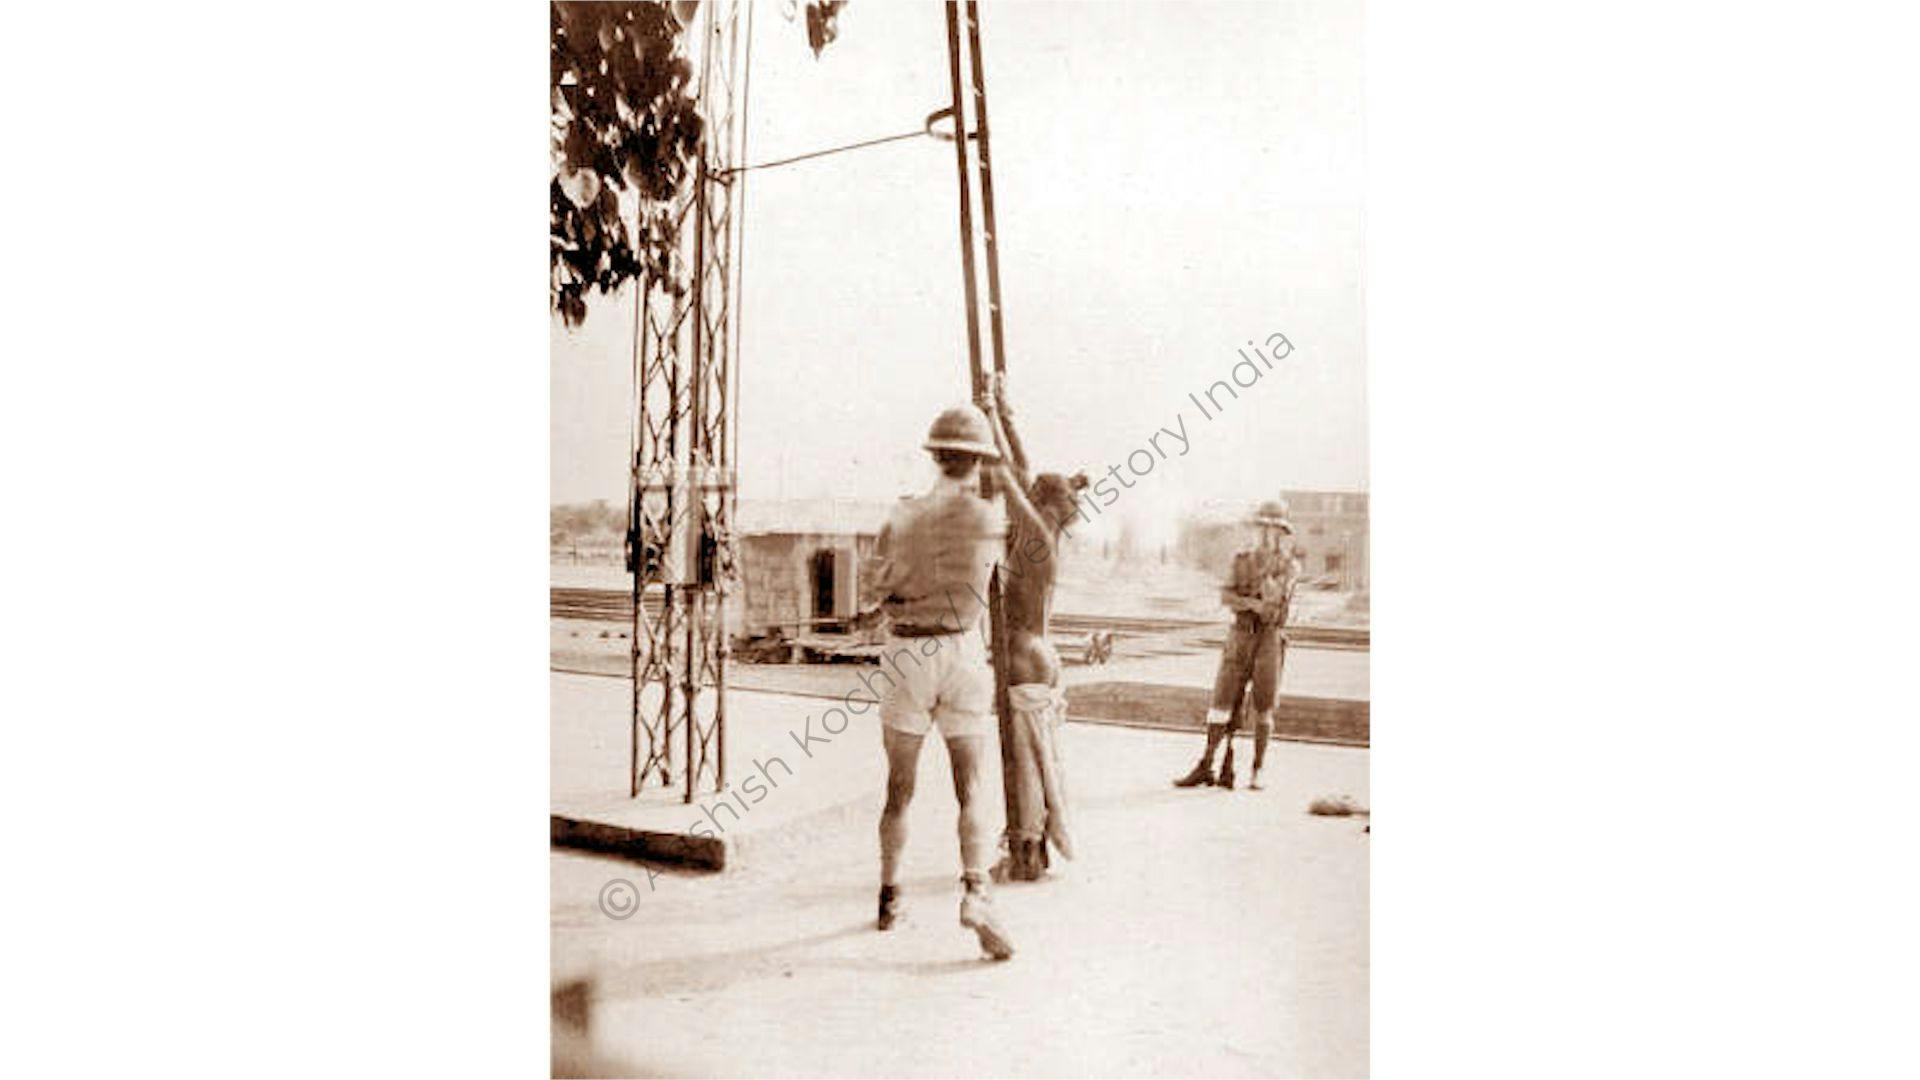 Flopping booth used for punishment (2)